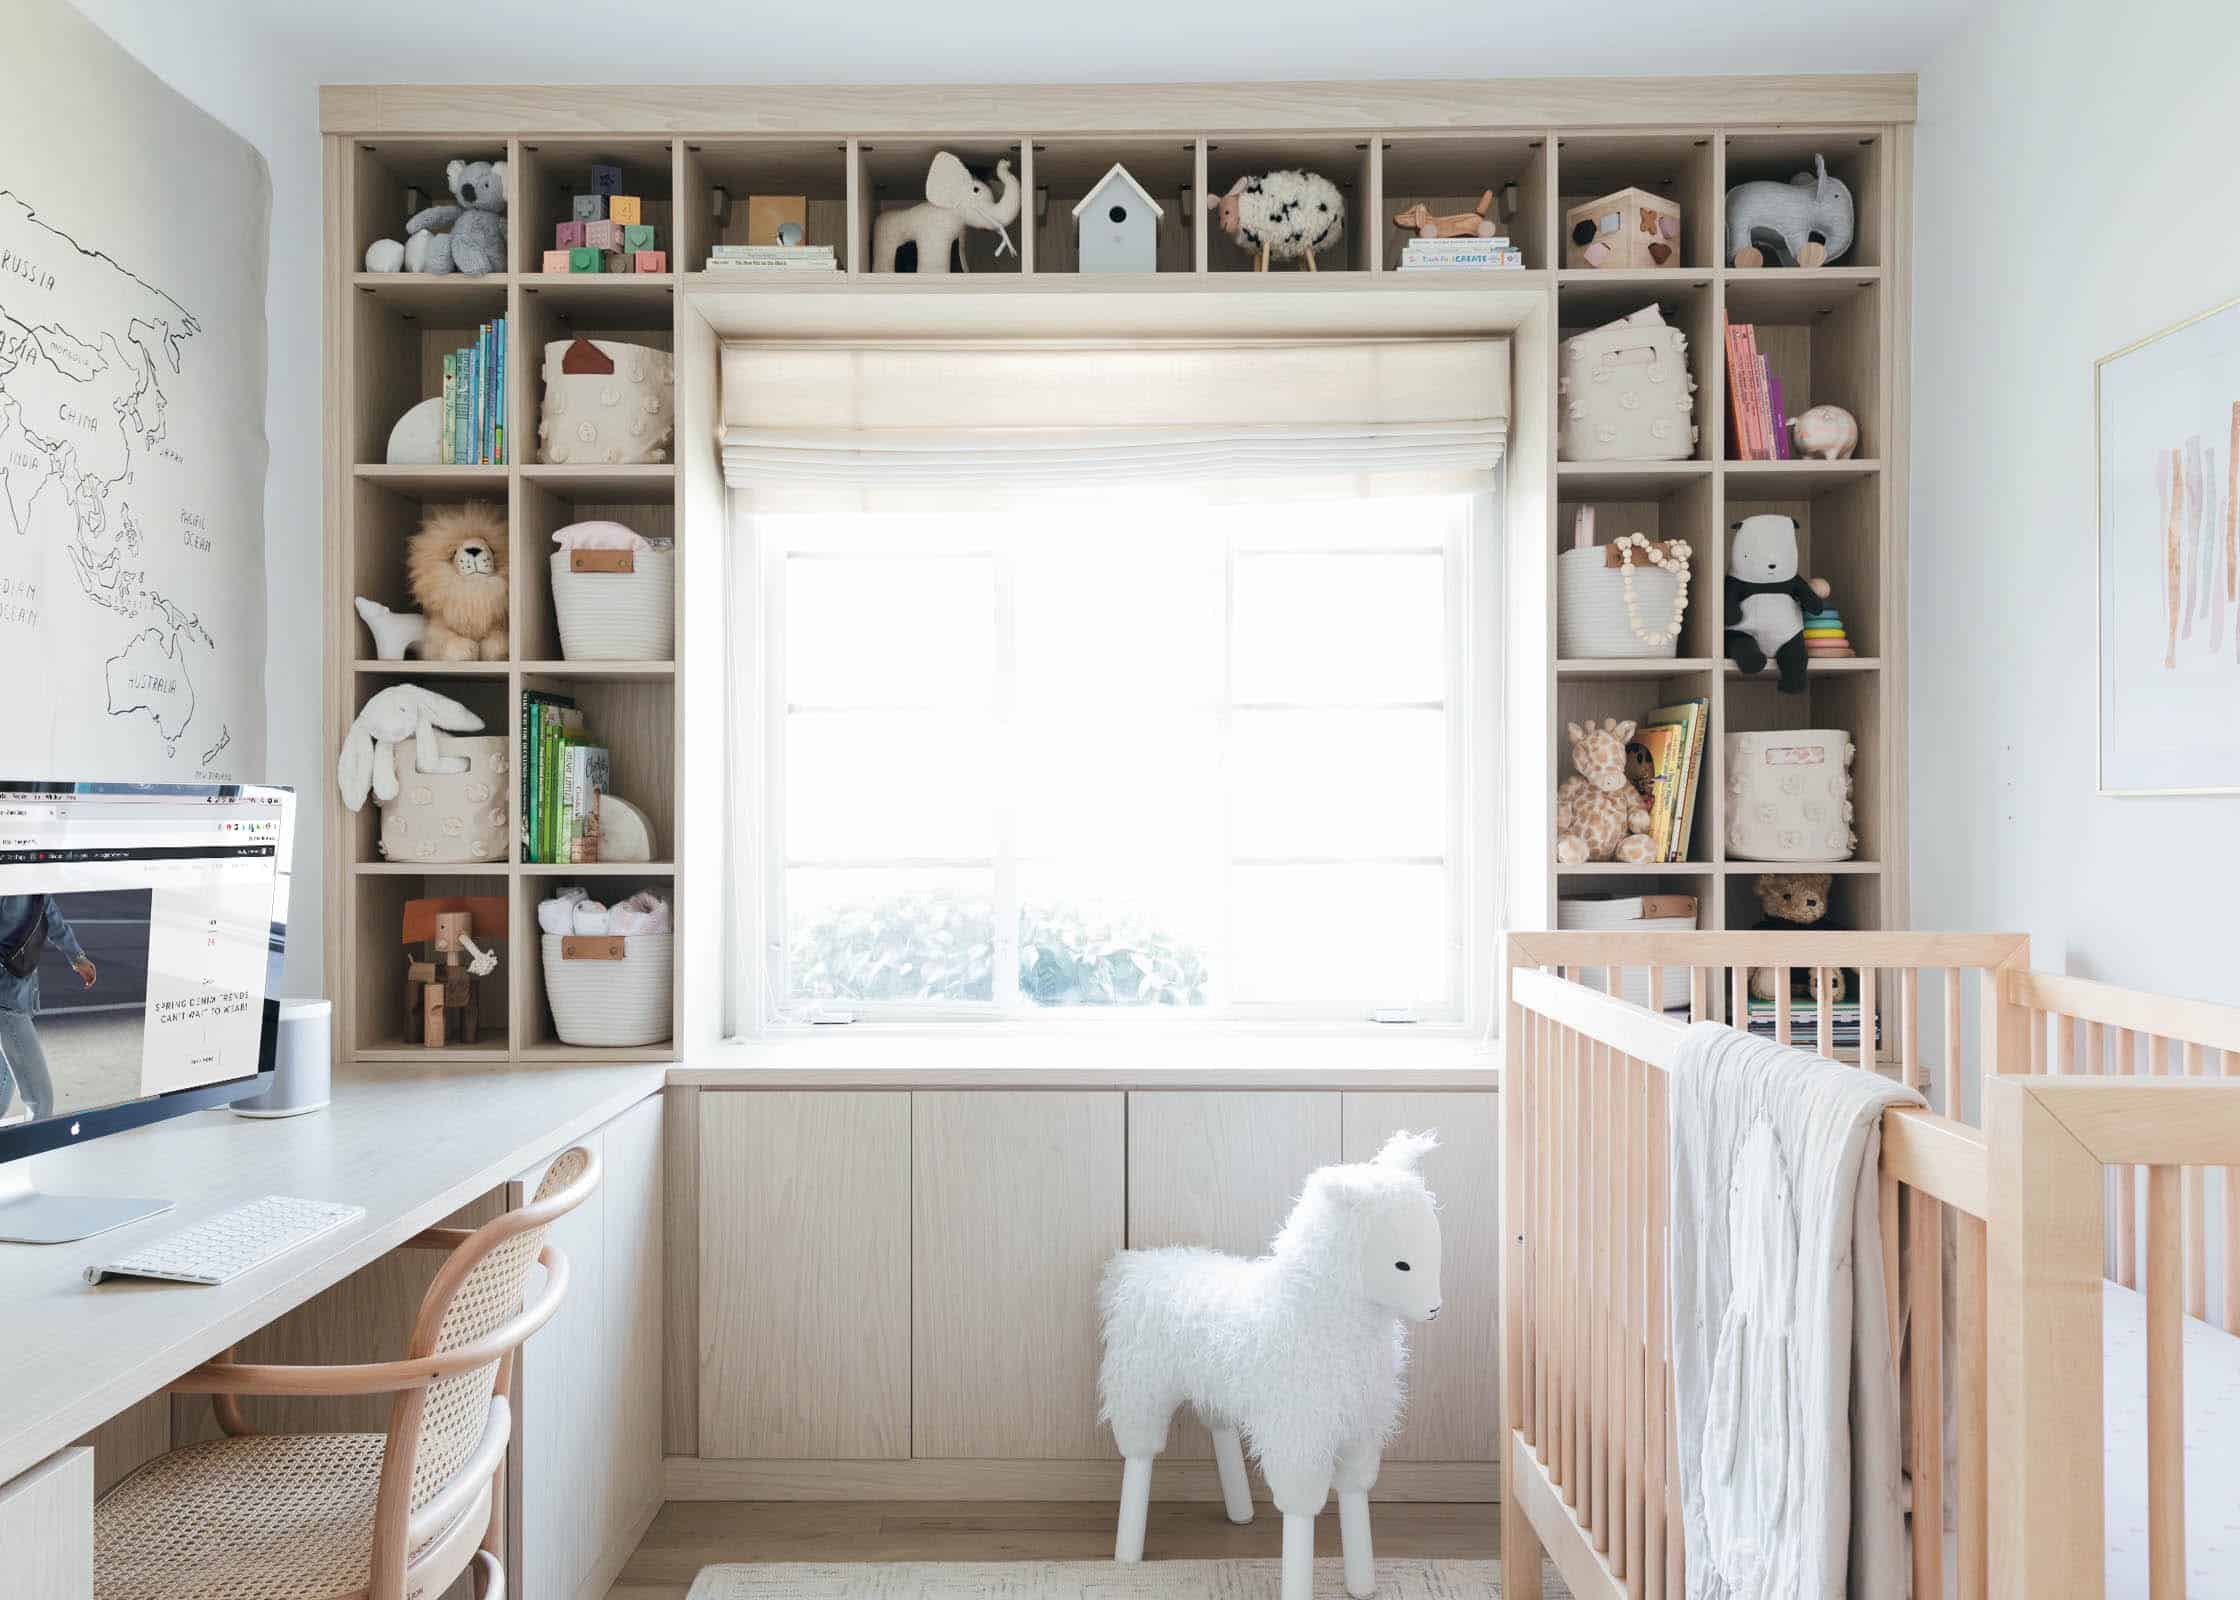 Revamping The Nursery: Home Improvement For Baby’s Arrival